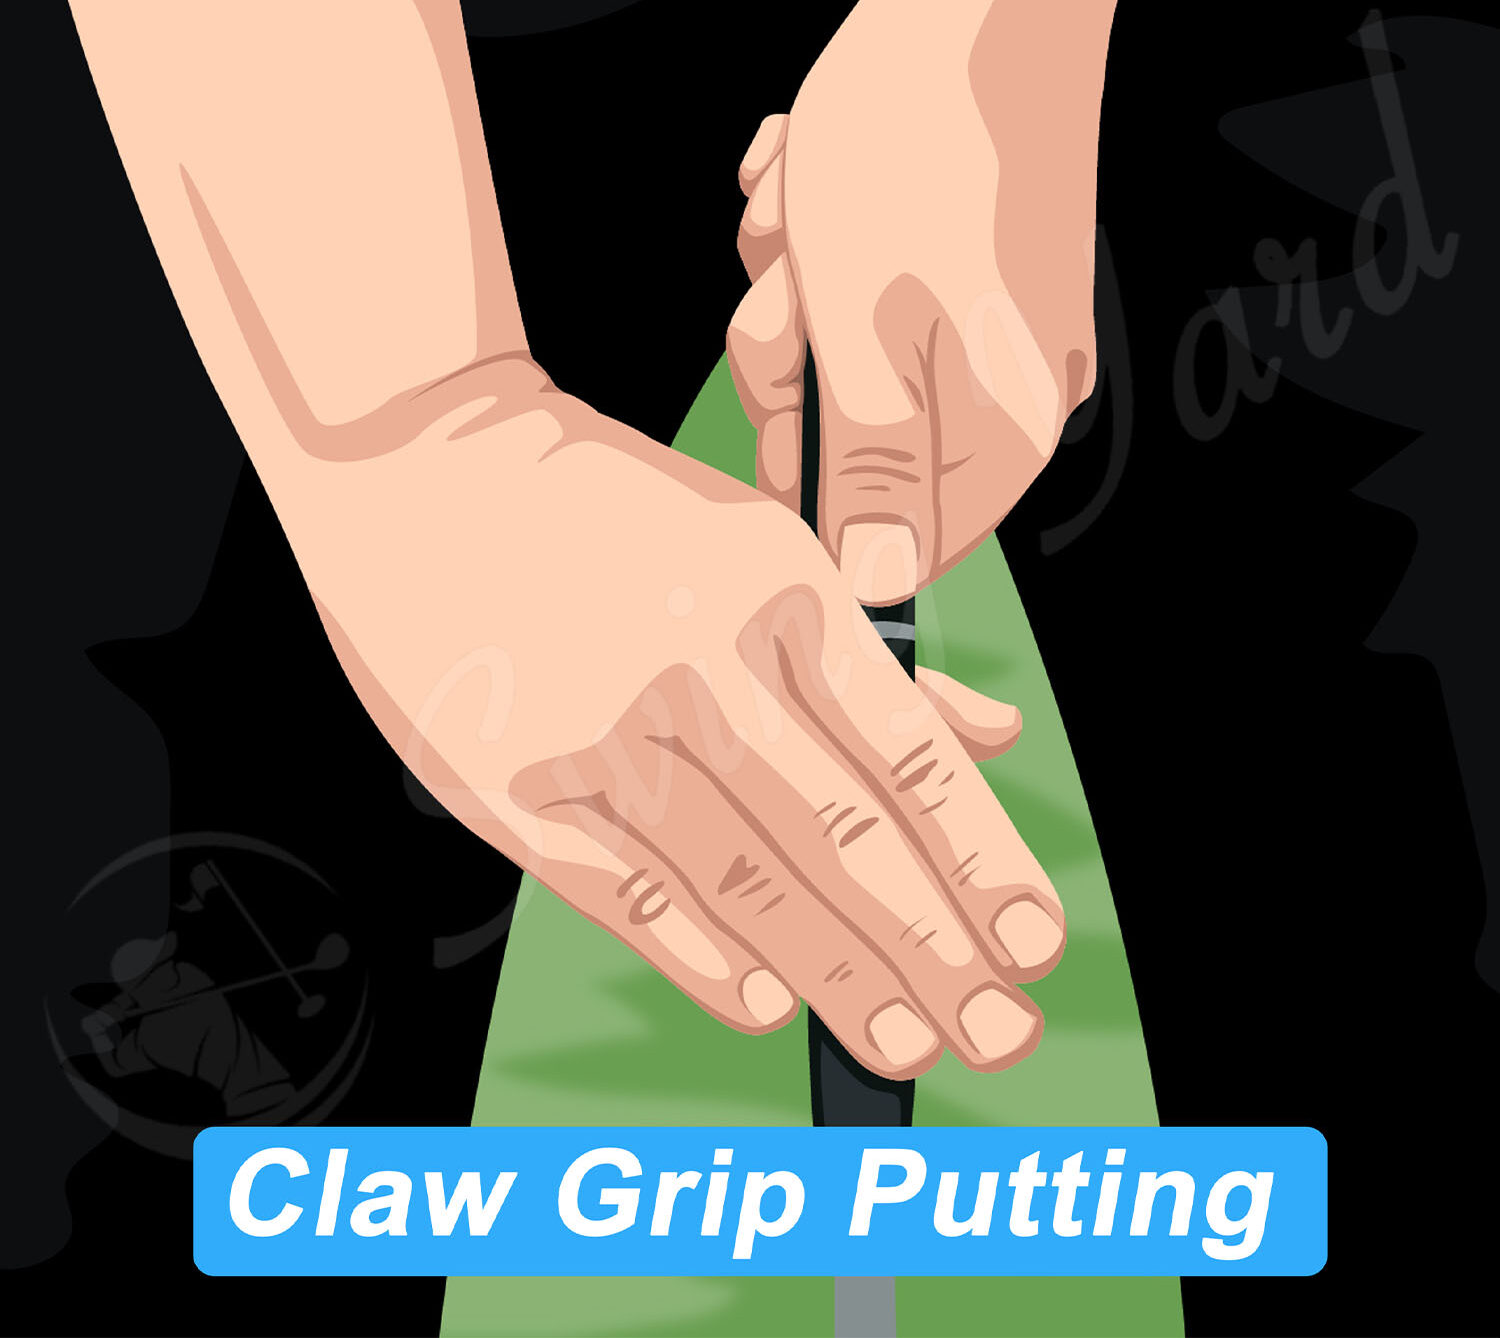 Claw grip putting style